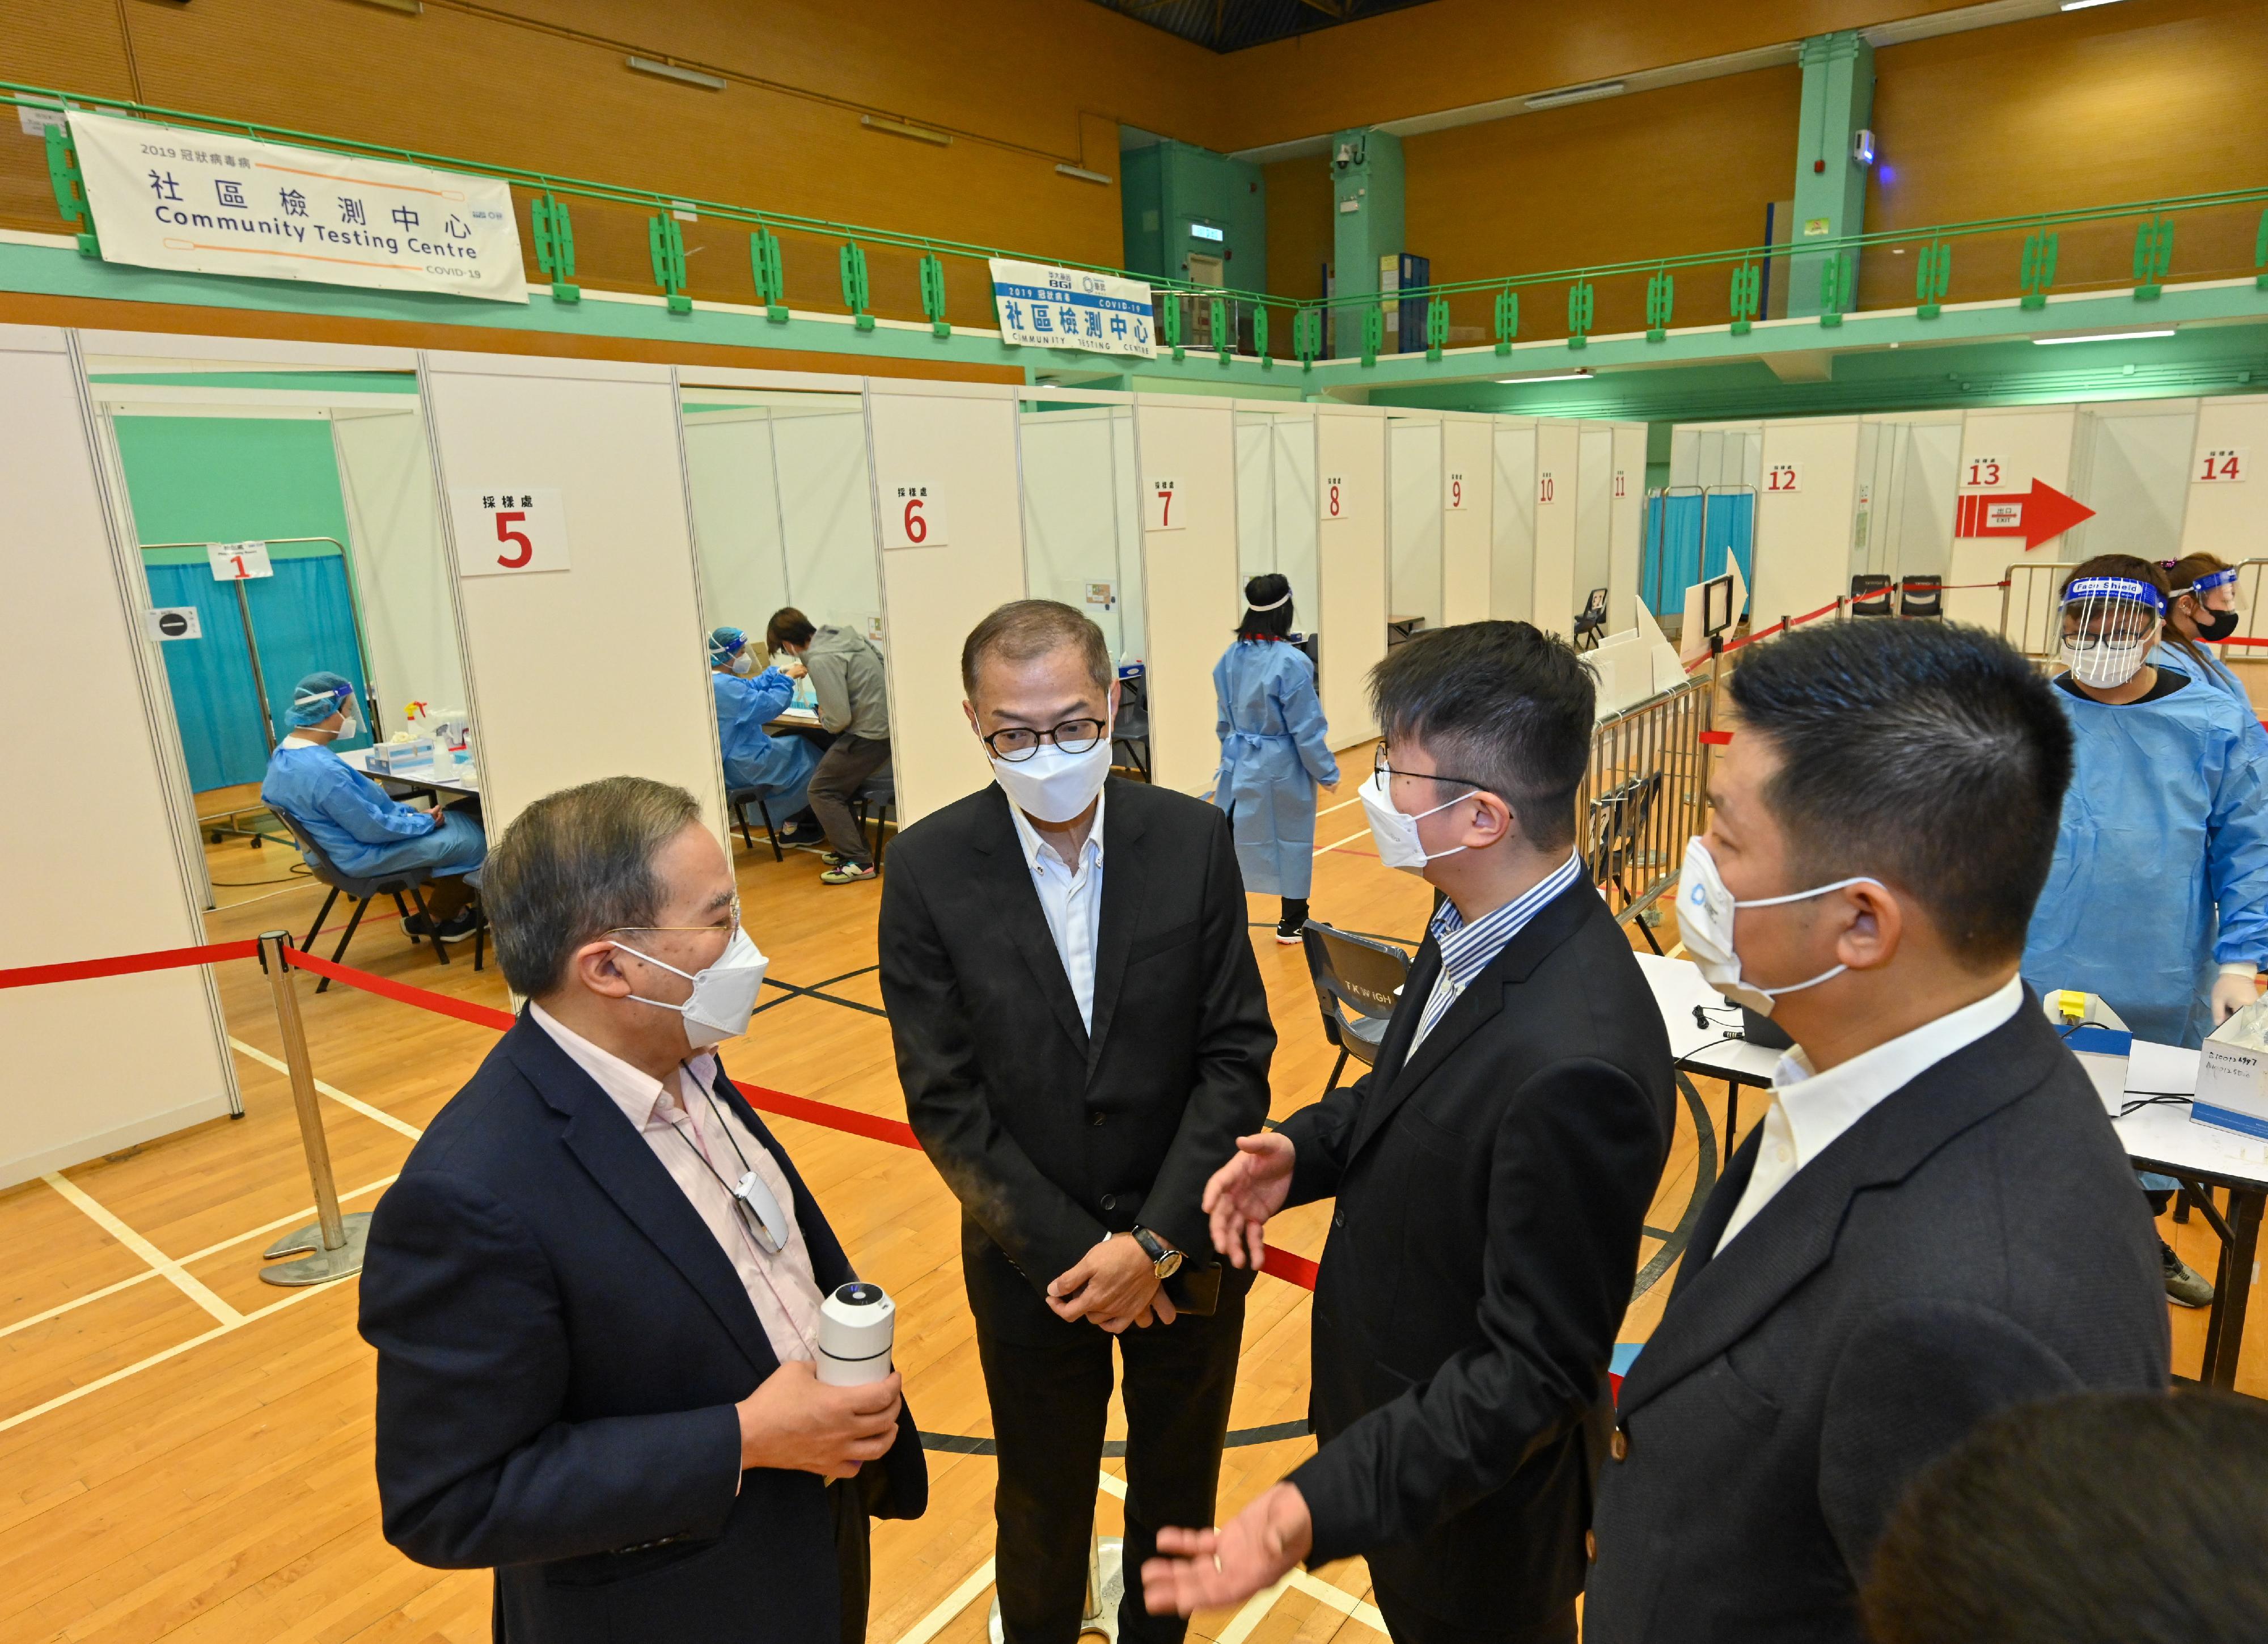 The Secretary for Health, Professor Lo Chung-mau, visited the community testing centre (CTC) located at To Kwa Wan Sports Centre this morning (January 9) to have a better grasp of its operation and the situation of members of the public undergoing tests there. Photo shows Professor Lo (second left) receiving a briefing by the persons-in-charge of the CTC on its operation.